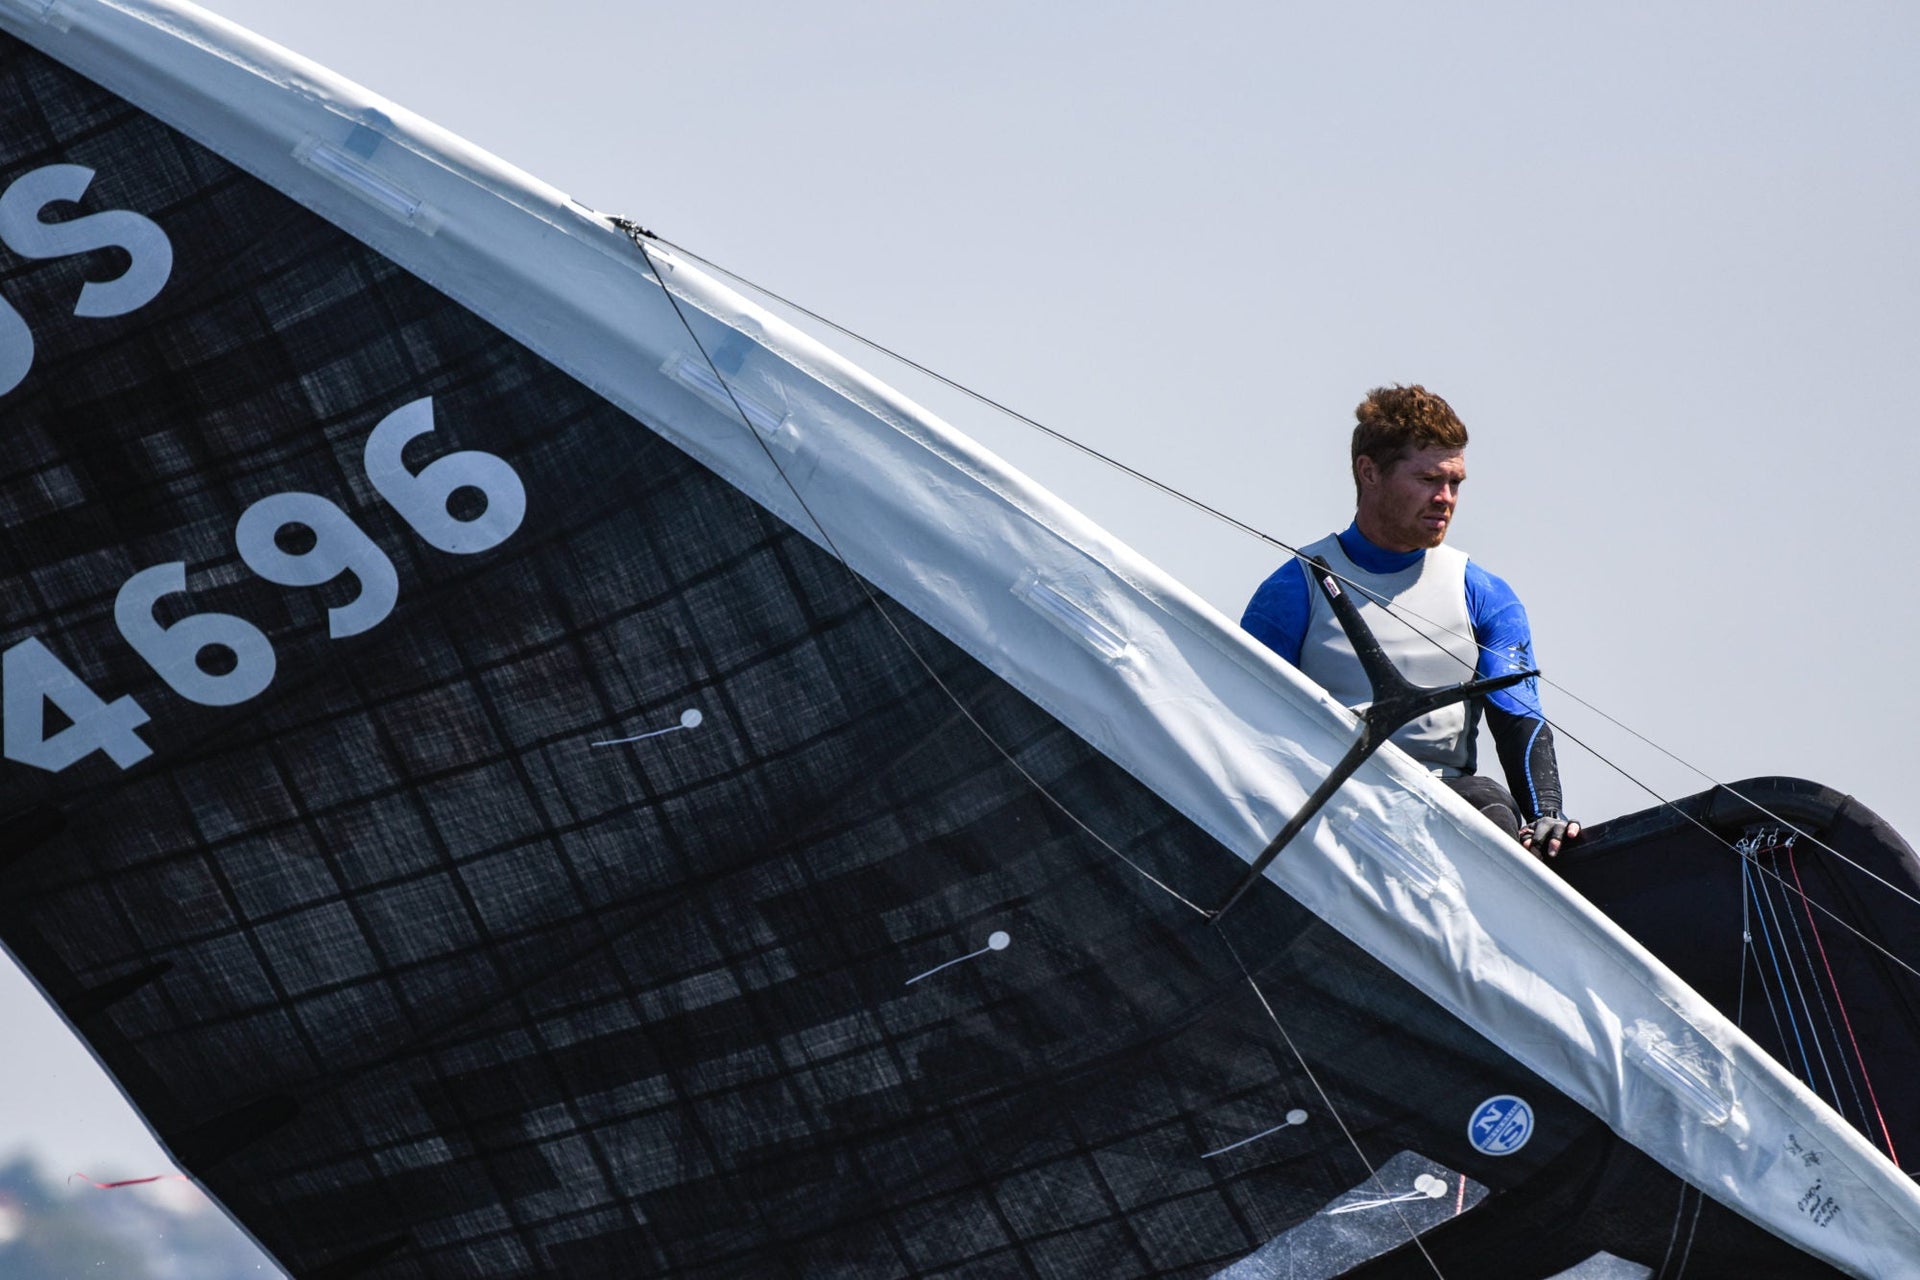 SLINGSBY DOMINATES AT MOTH WORLDS